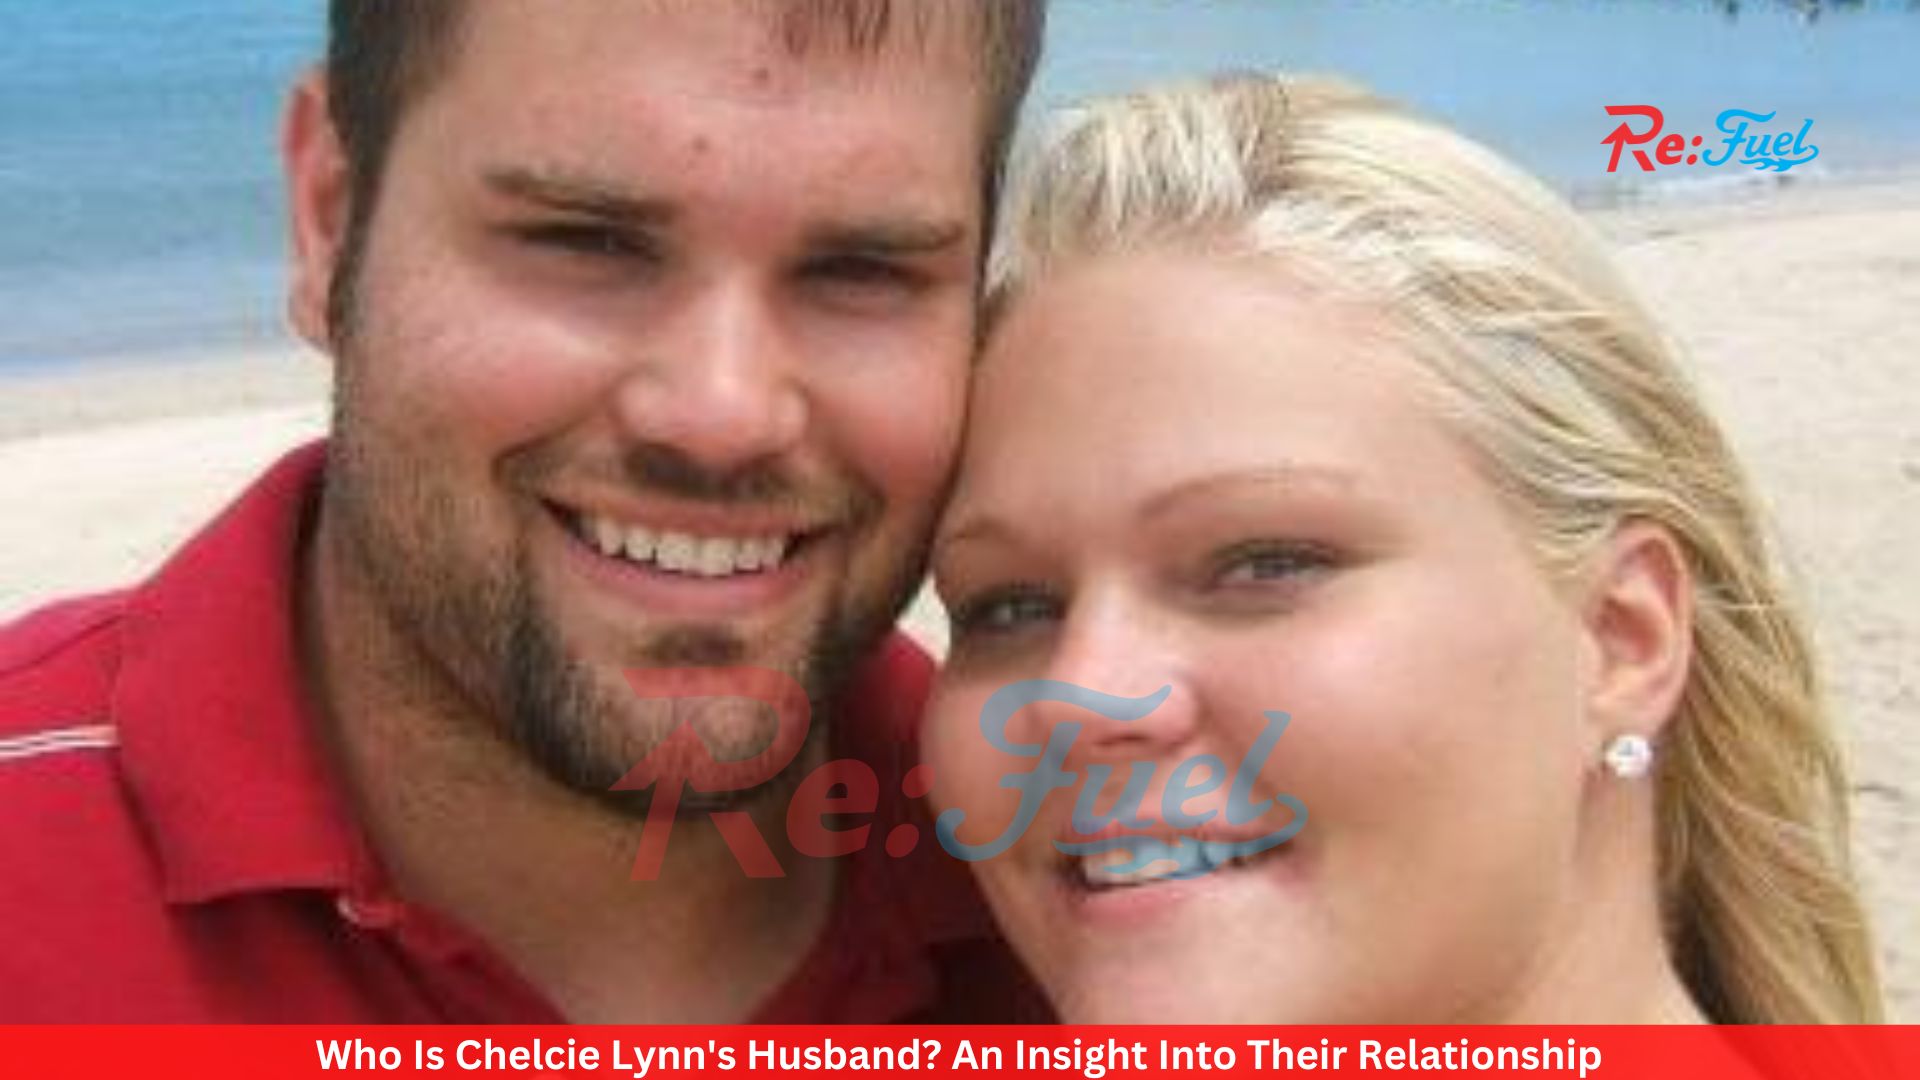 Who Is Chelcie Lynn's Husband? An Insight Into Their Relationship